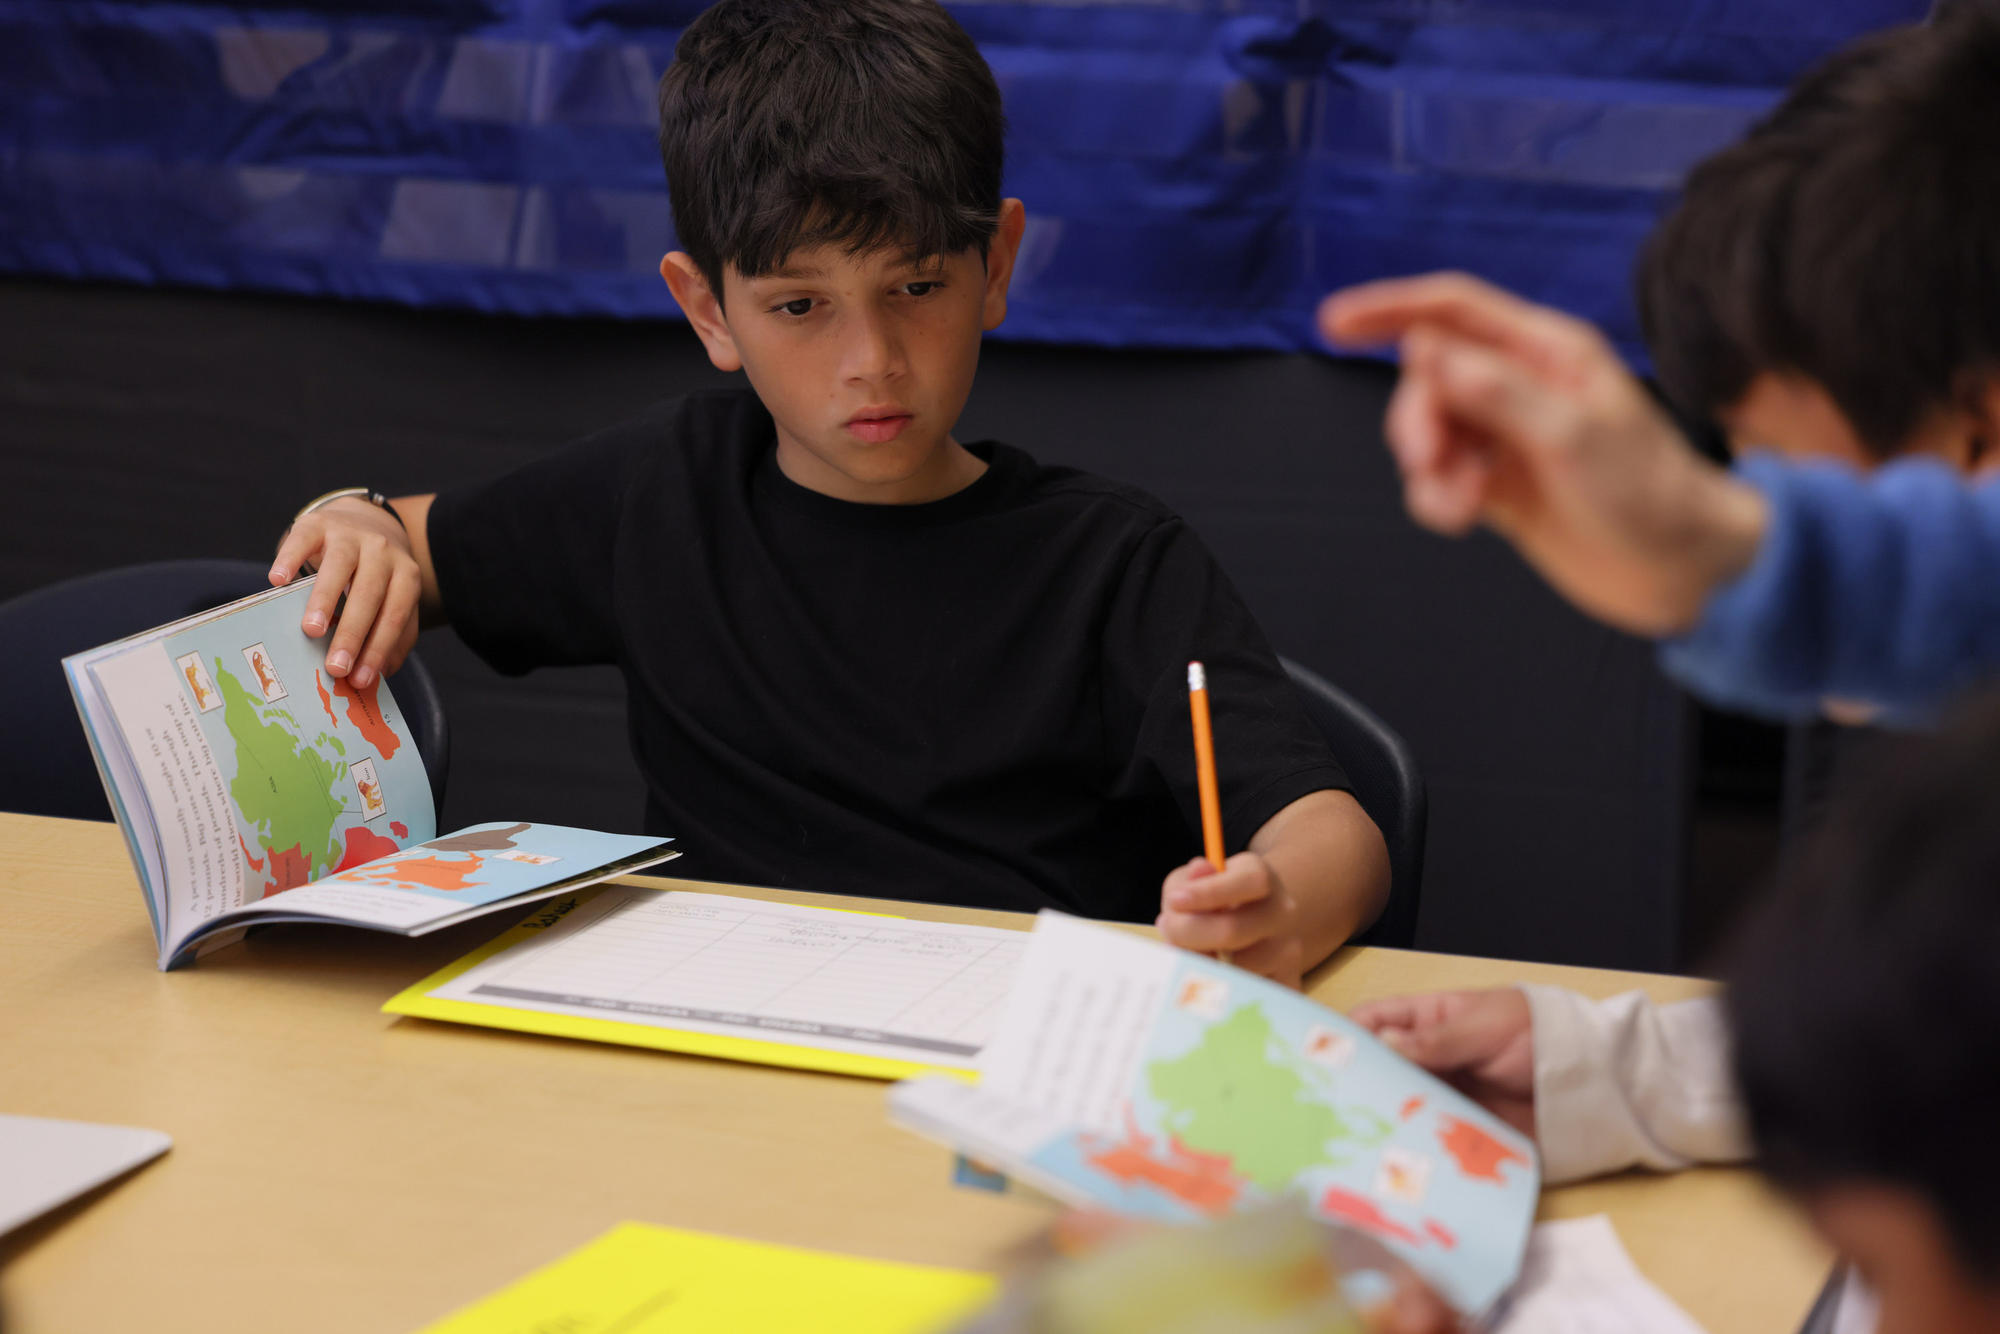 Baheer Heyadee, 10, works on reading skills with classmates at Parkside Elementary. Many of Baheer’s friends at school are from immigrant families as well. (Genna Martin/Cascade PBS) (Genna Martin/Crosscut)